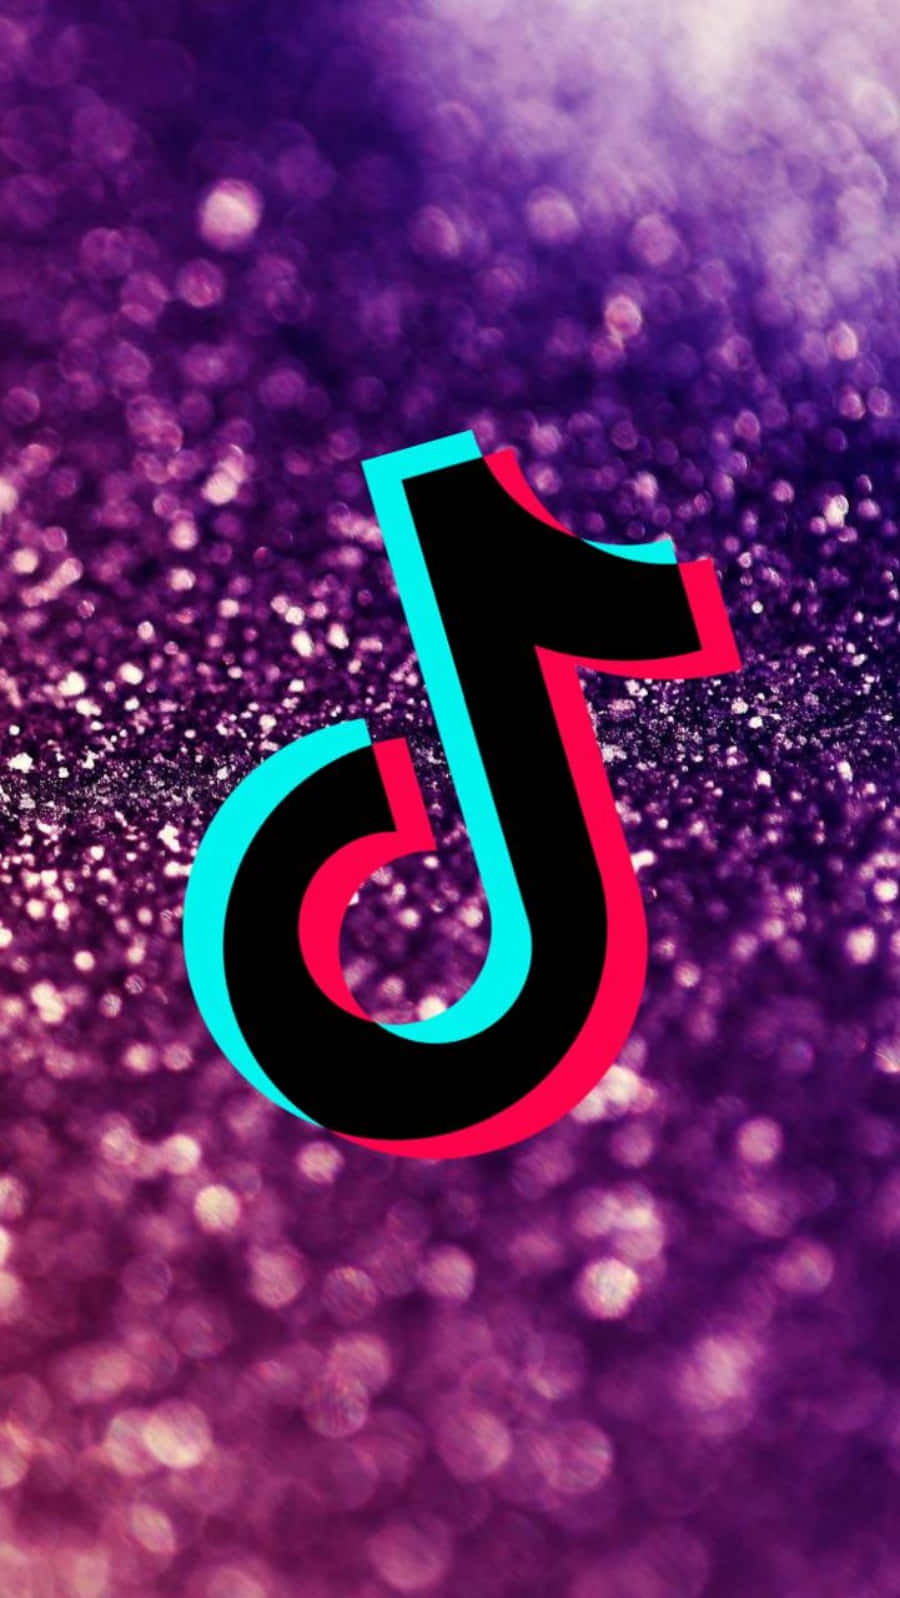 Download Get Ready to Share Unique Videos on TikTok | Wallpapers.com